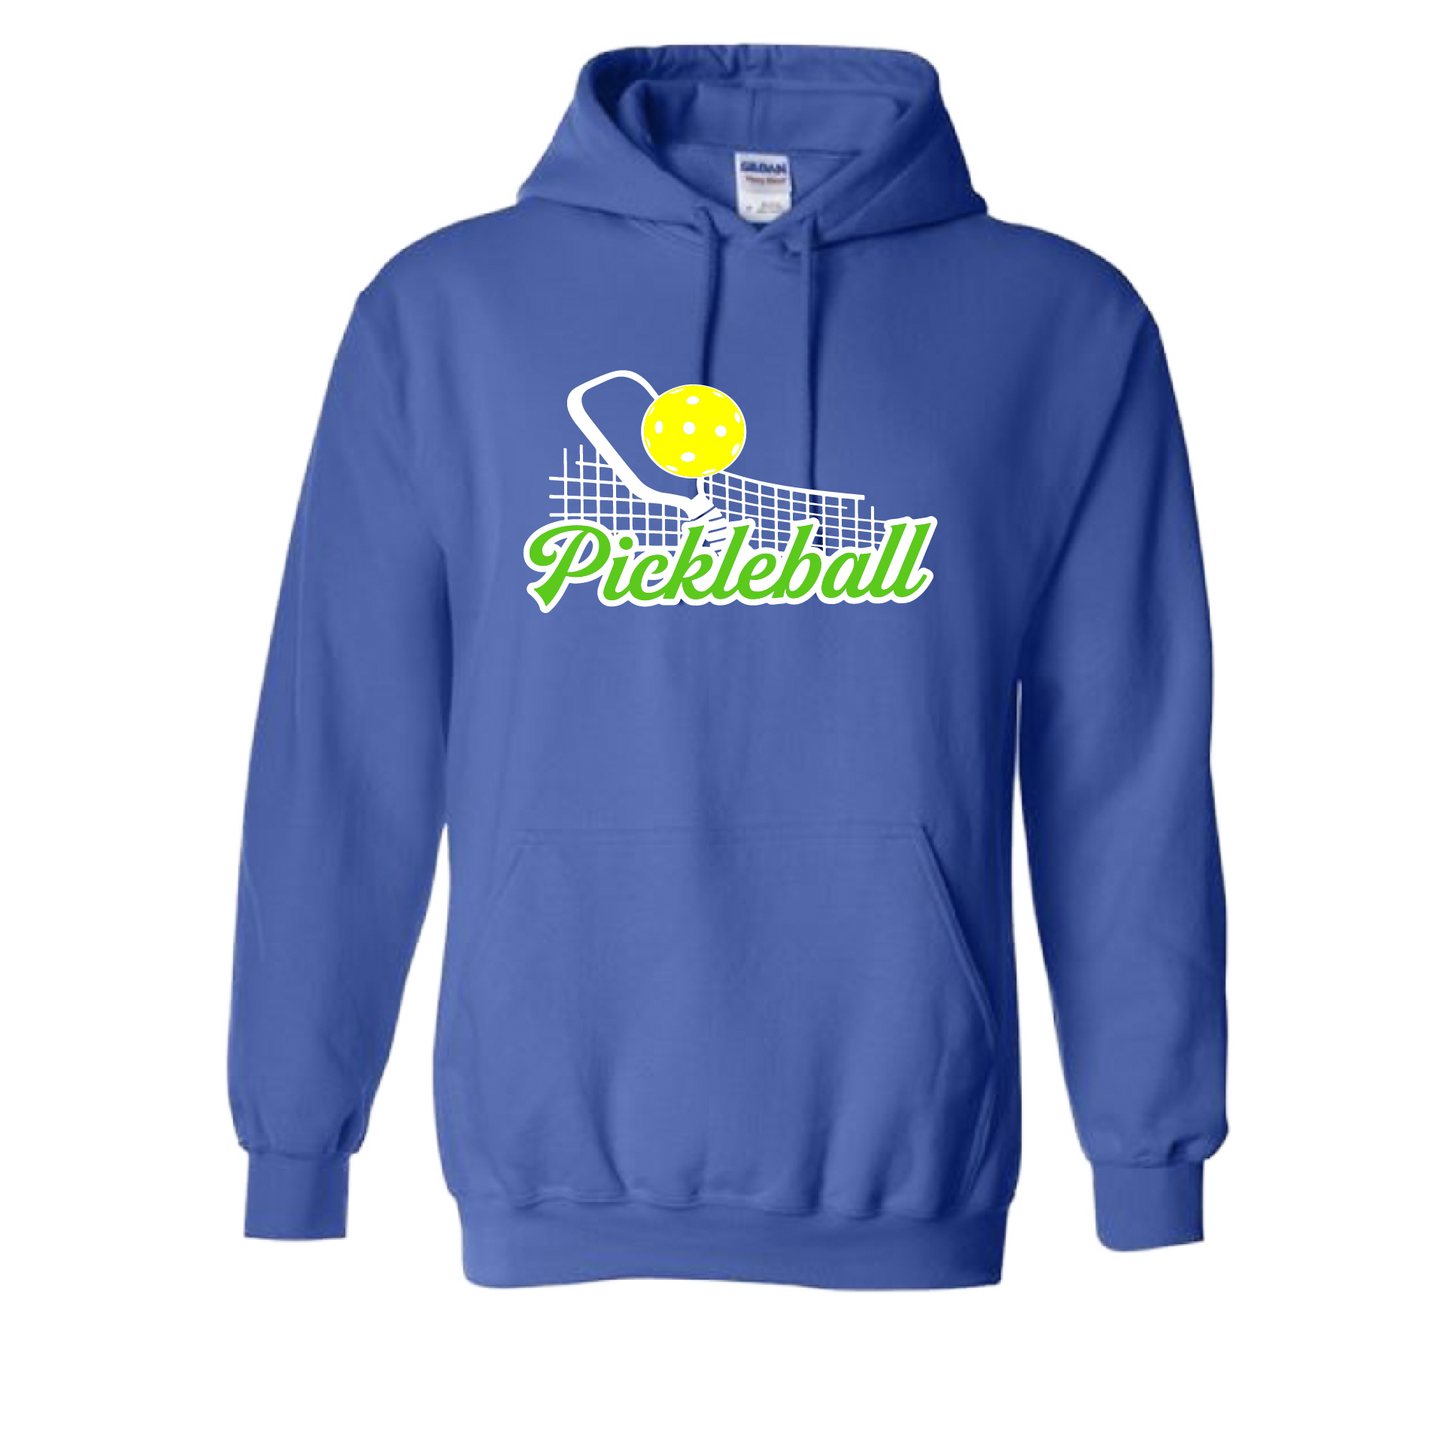 Pickleball Design: Pickleball and Net  Unisex Hooded Sweatshirt: Moisture-wicking, double-lined hood, front pouch pocket.  This unisex hooded sweatshirt is ultra comfortable and soft. Stay warm on the Pickleball courts while being that hit with this one of kind design.